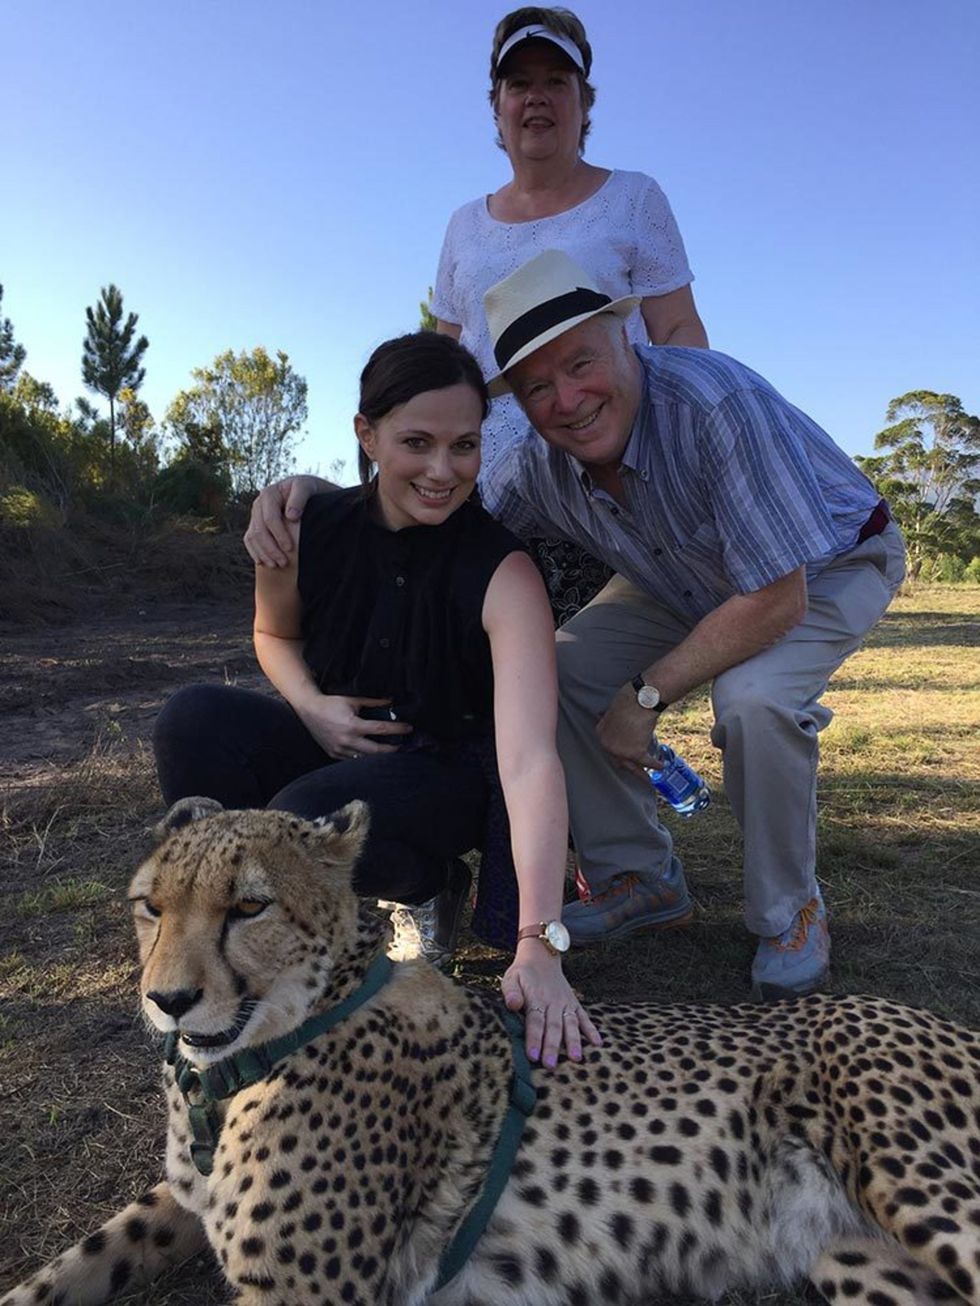 Sophie Beresiner, Beauty Director
 
 
 This is me with Mum and  Dad at the Tenikwa Conservation park in Plettenberg Bay, South Africa. It's my spiritual home.